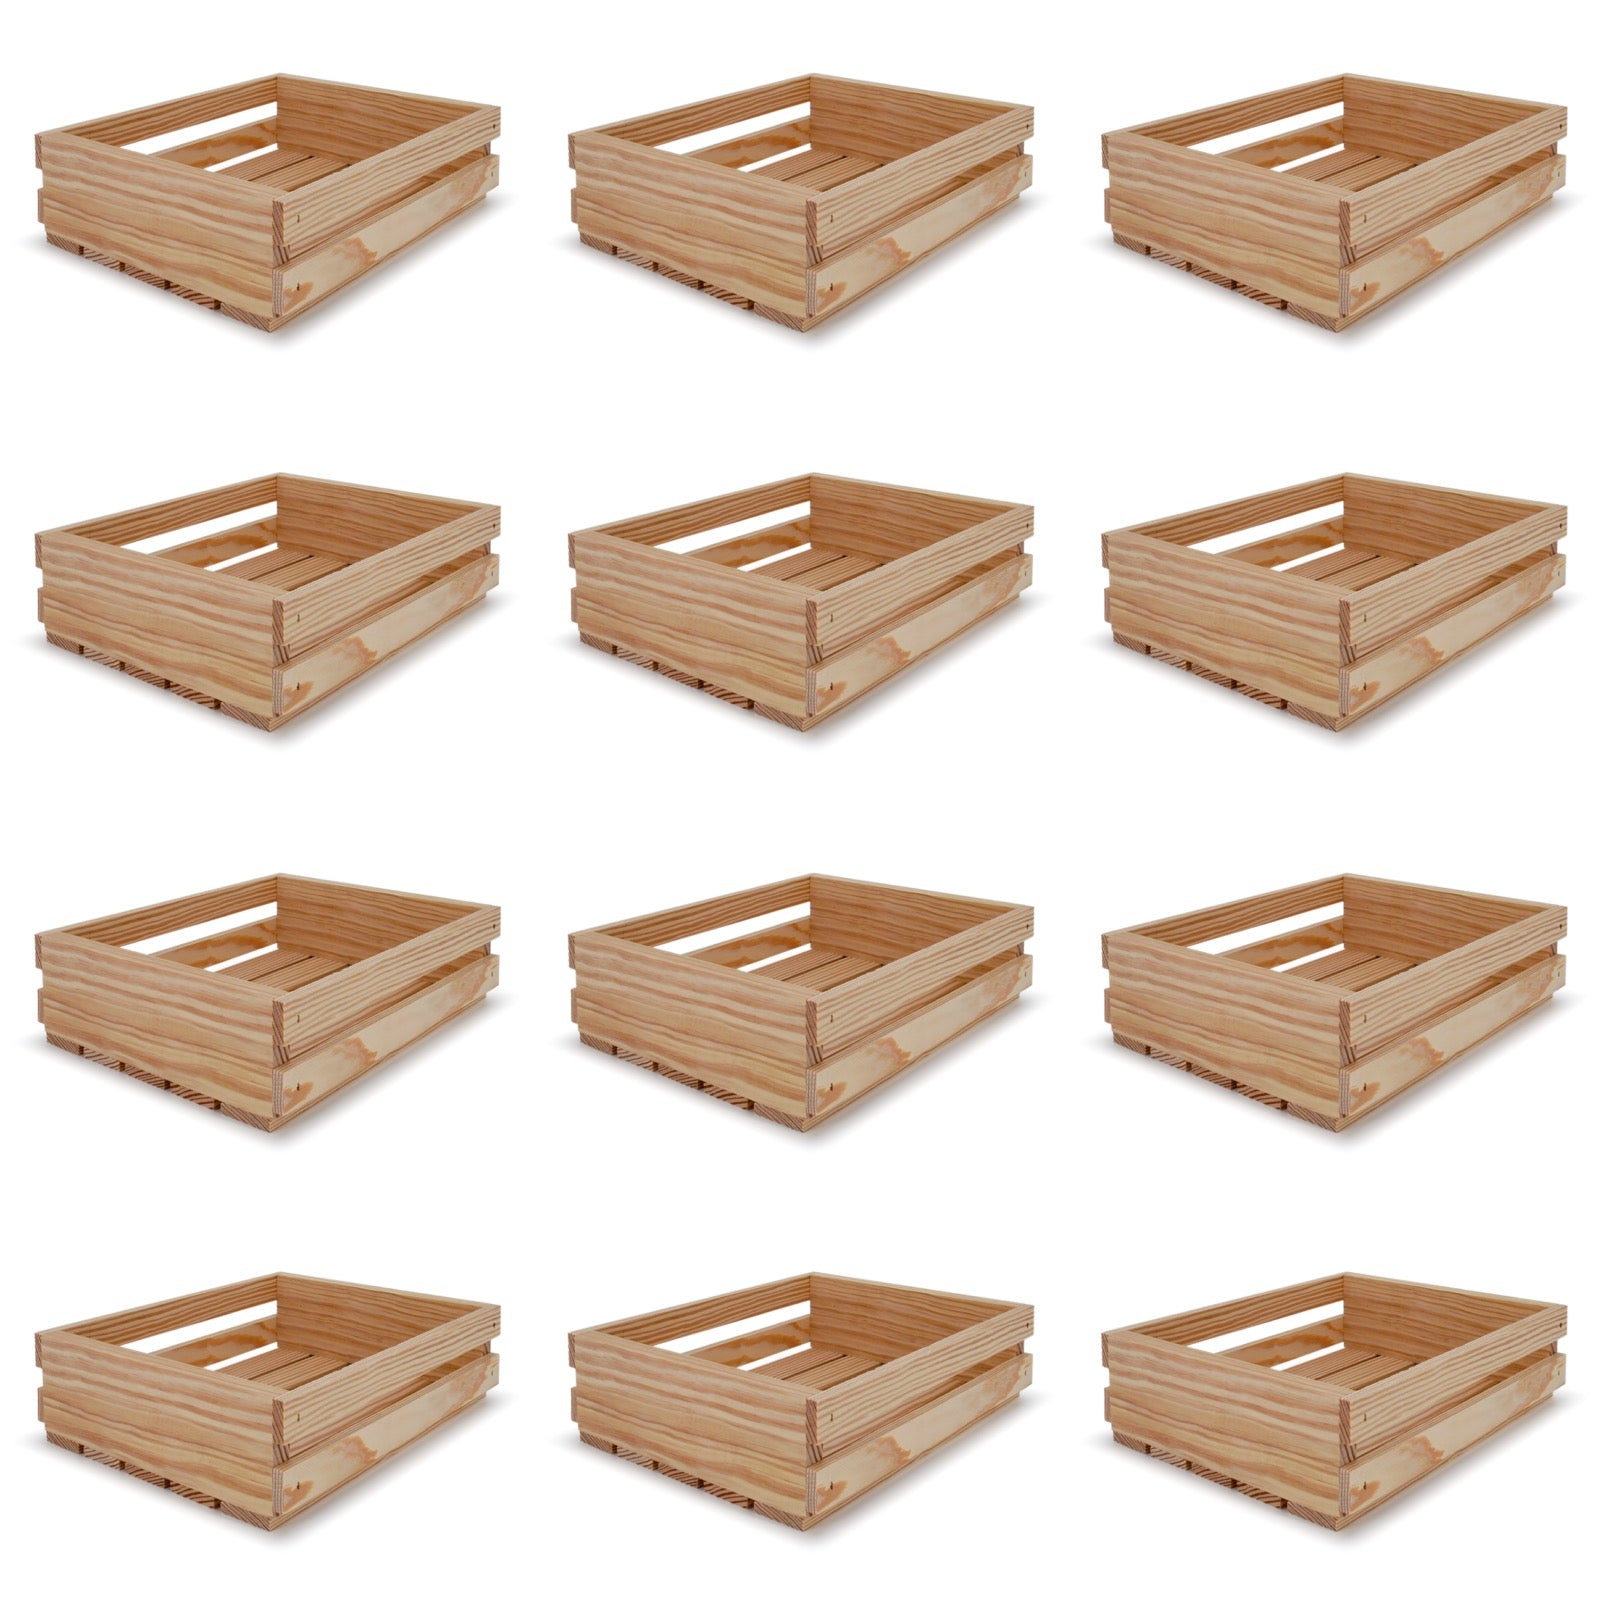 12 Small wooden crates 12x10x3.5